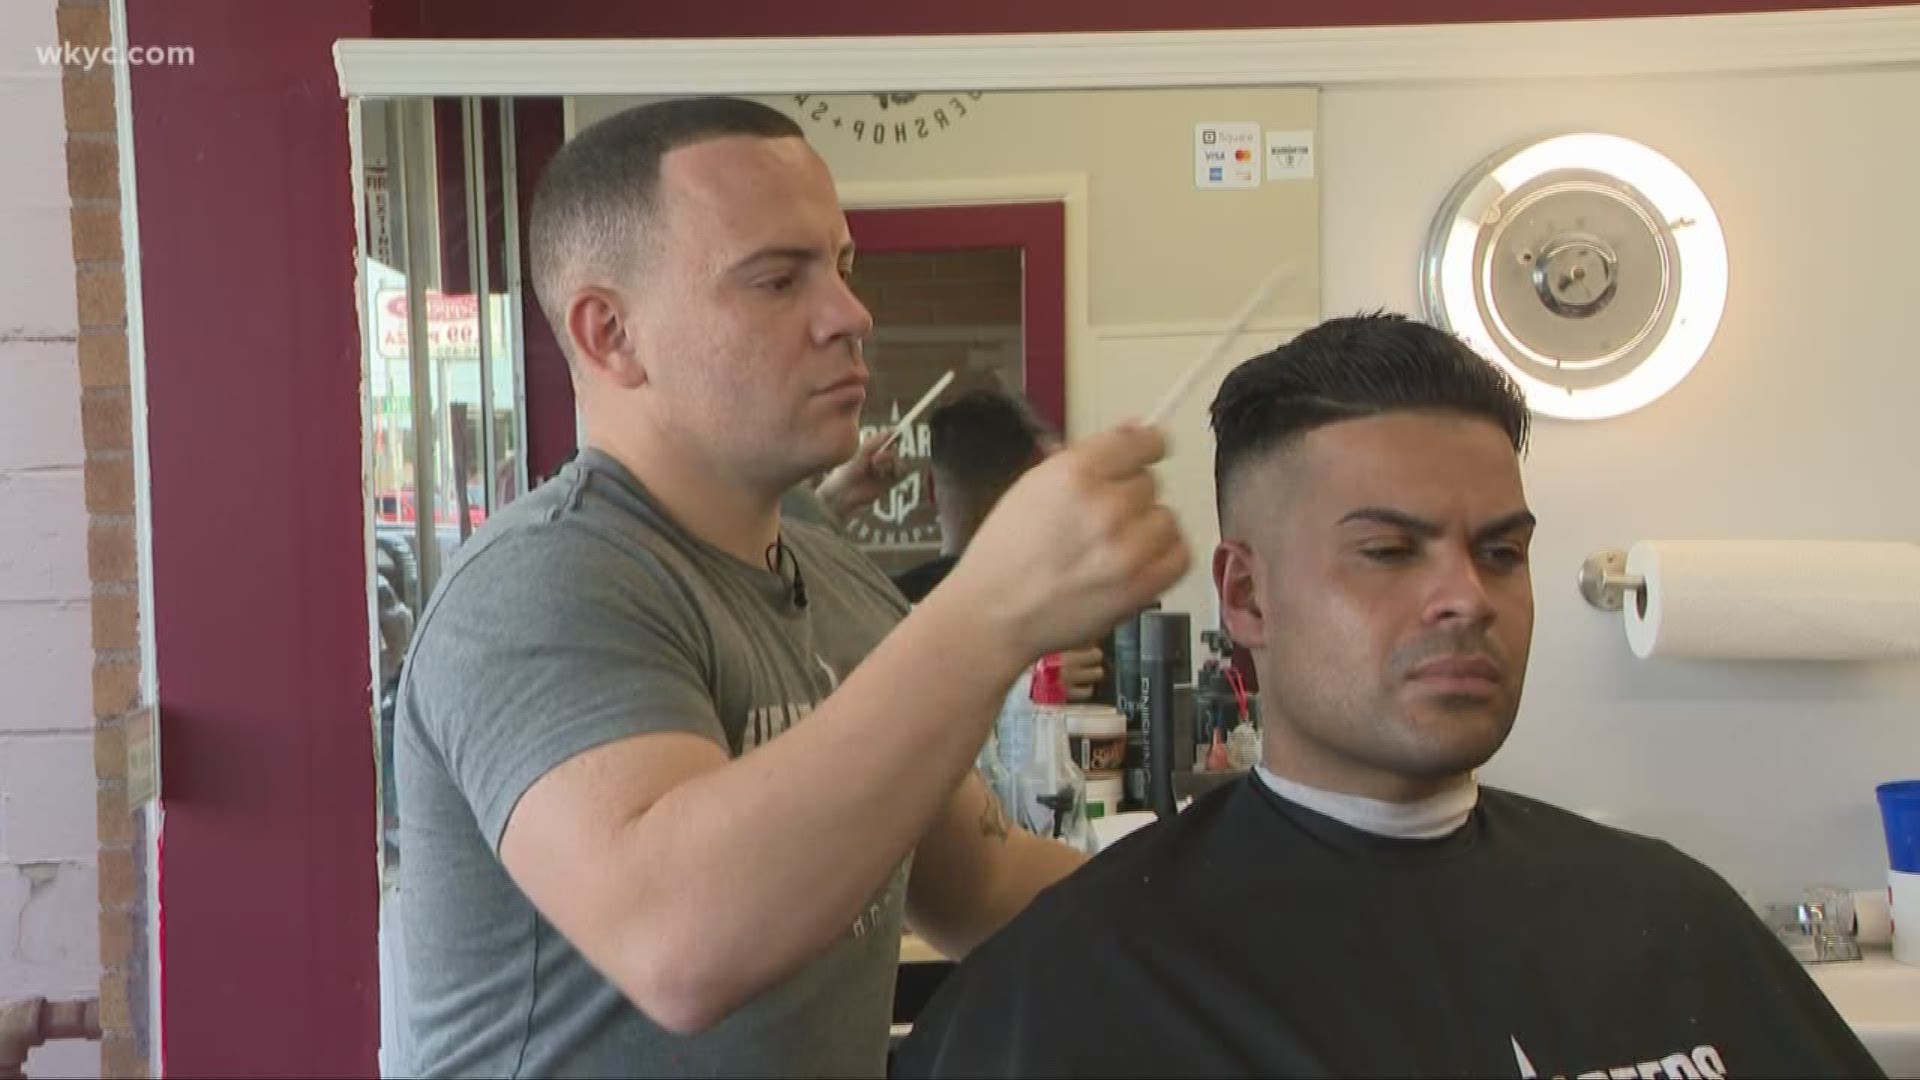 WKYC's Lindsay Buckingham reports on a local barber who doubles as a Cleveland police officer.